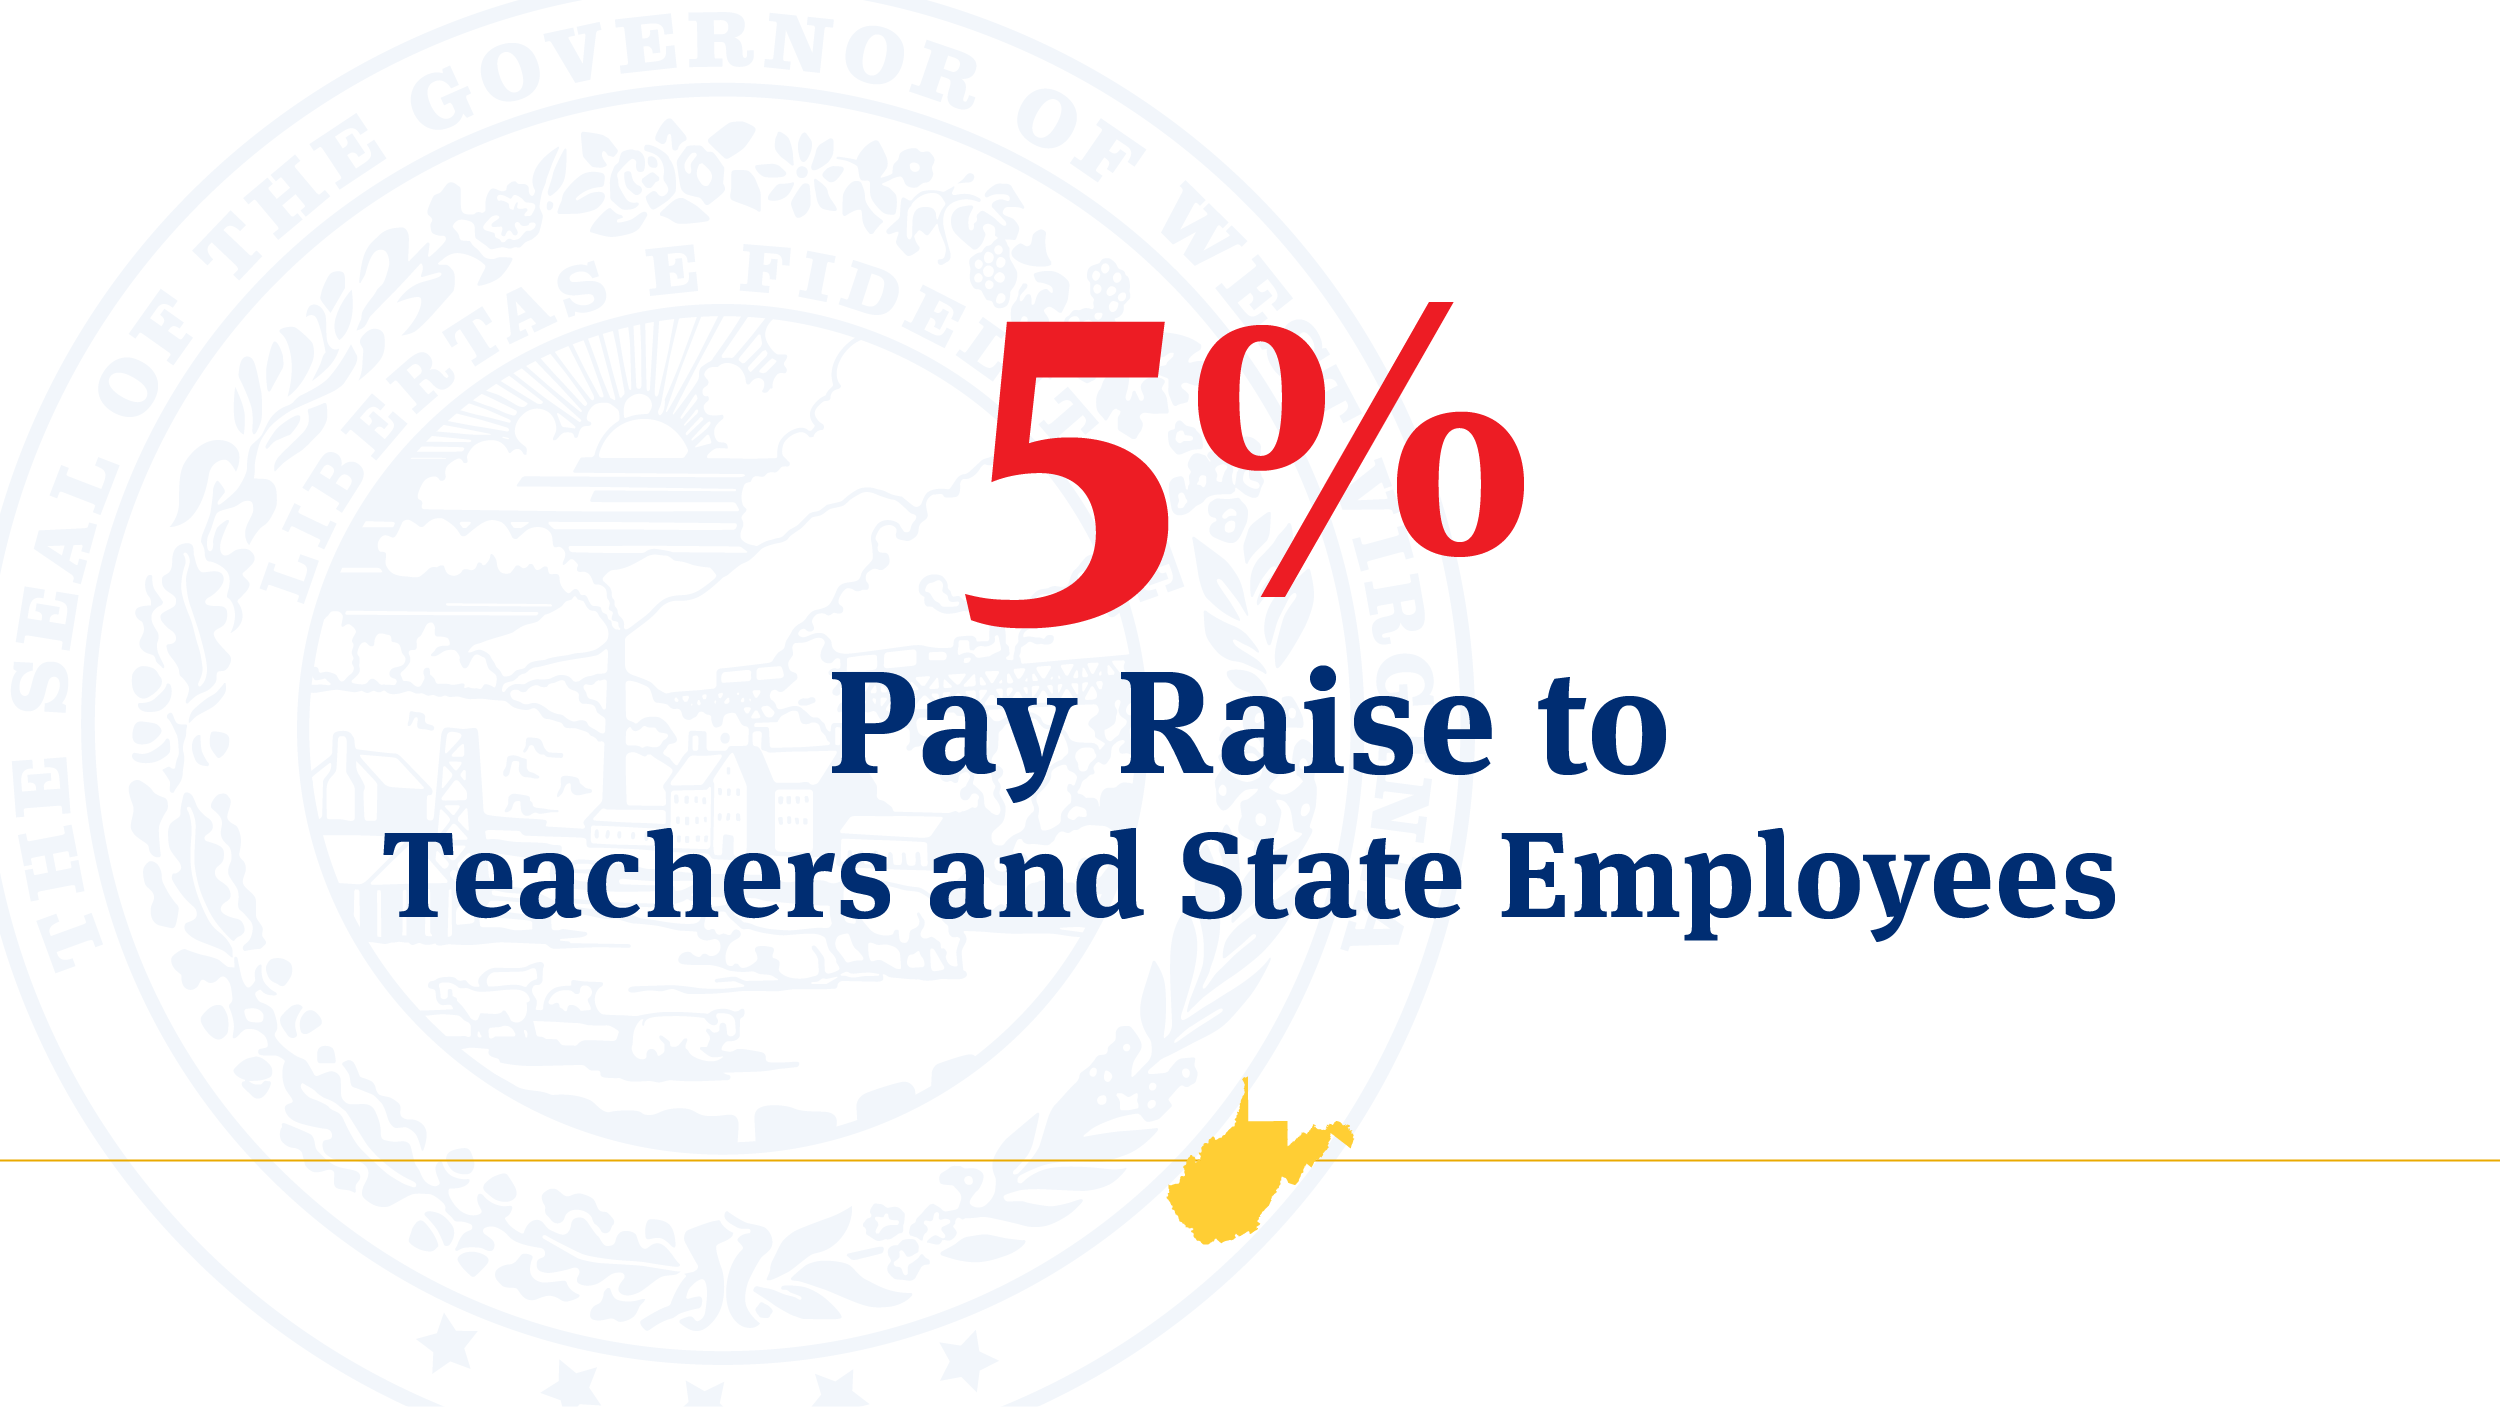 Gov. Justice announces 5 pay raise for teachers and state employees